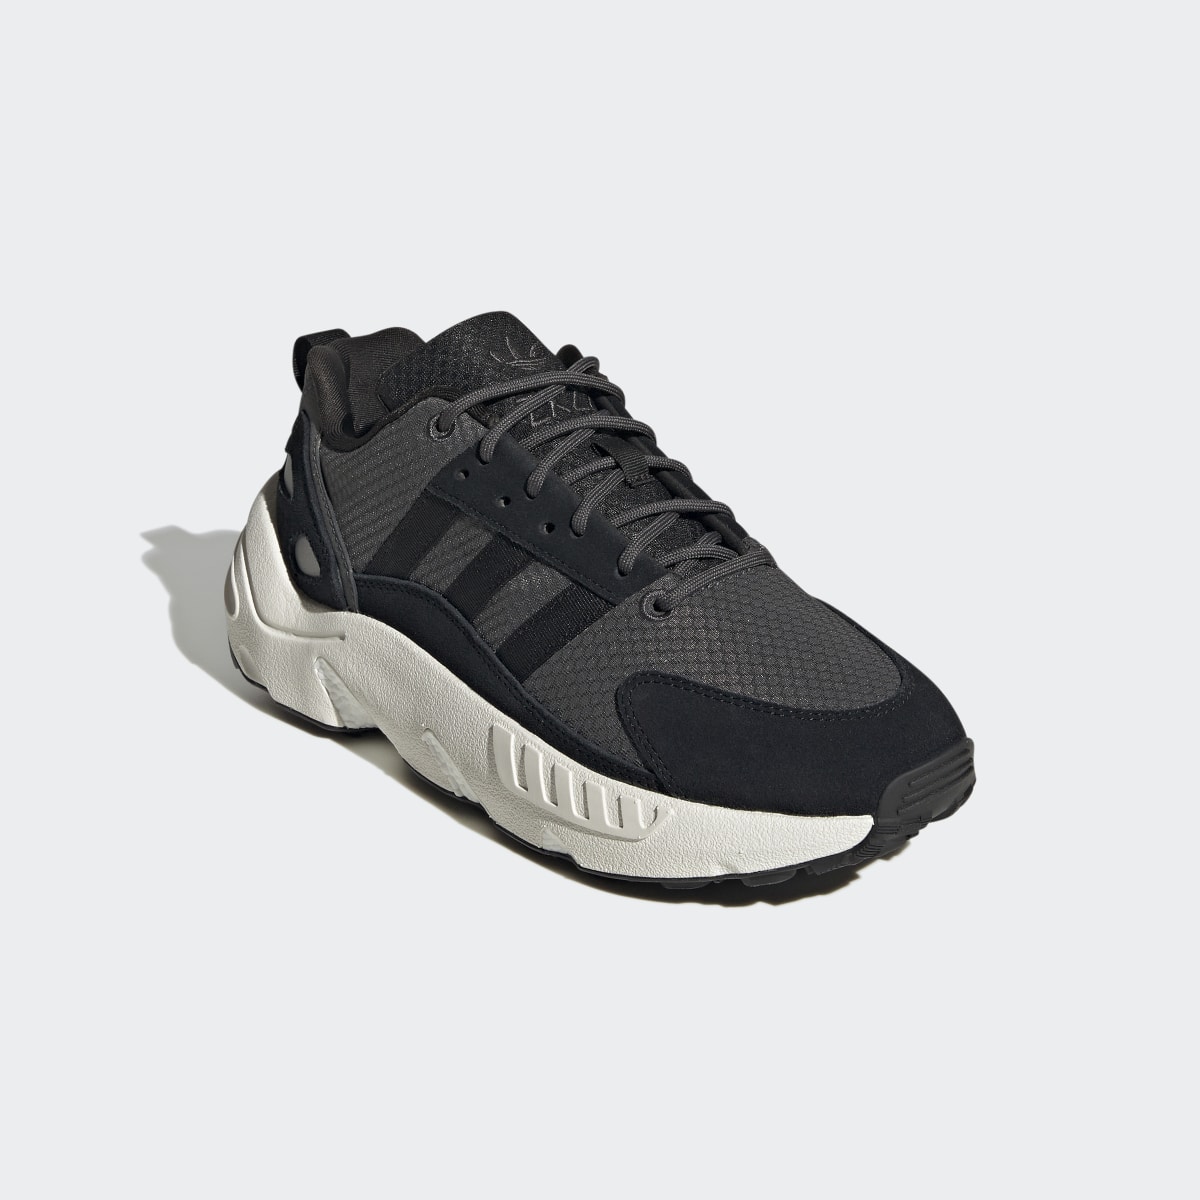 Adidas ZX 22 BOOST Shoes. 5